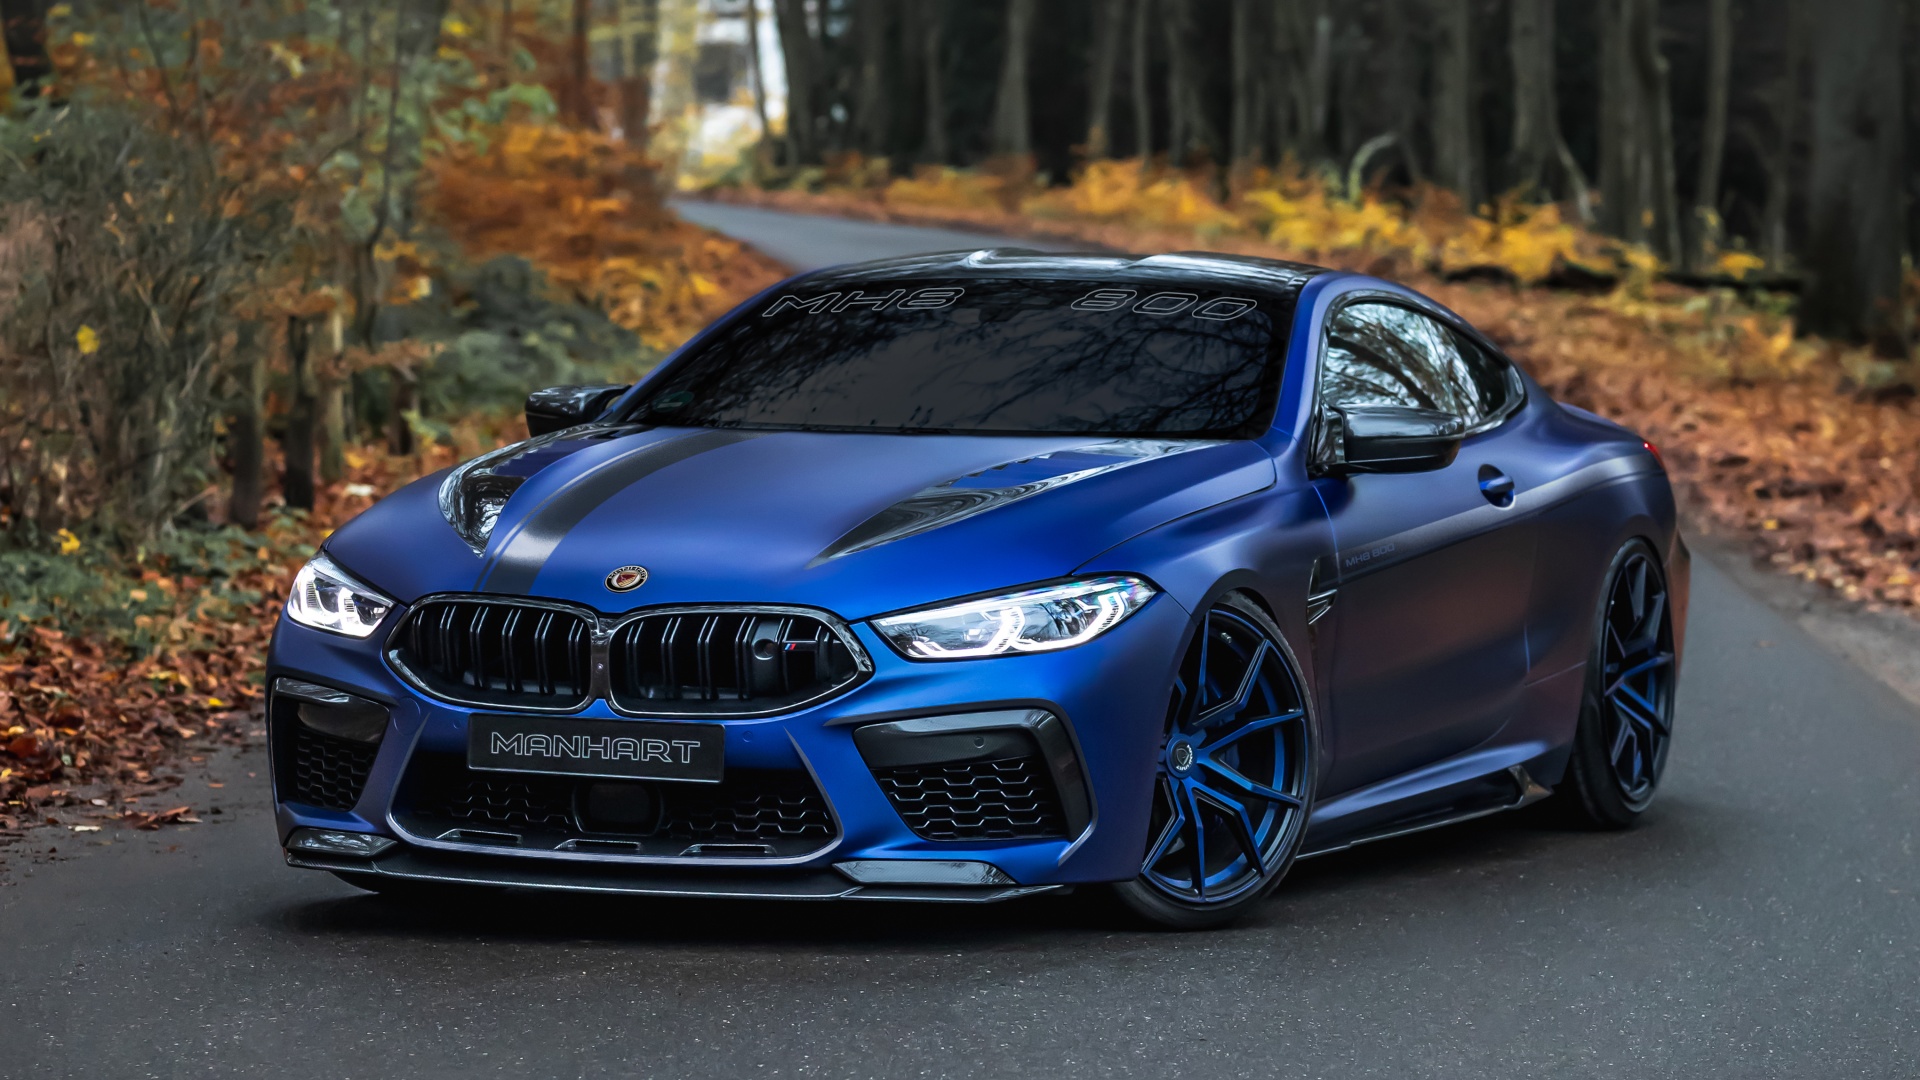 BMW M8 wallpaper by P3TR1T  Download on ZEDGE  4dcd